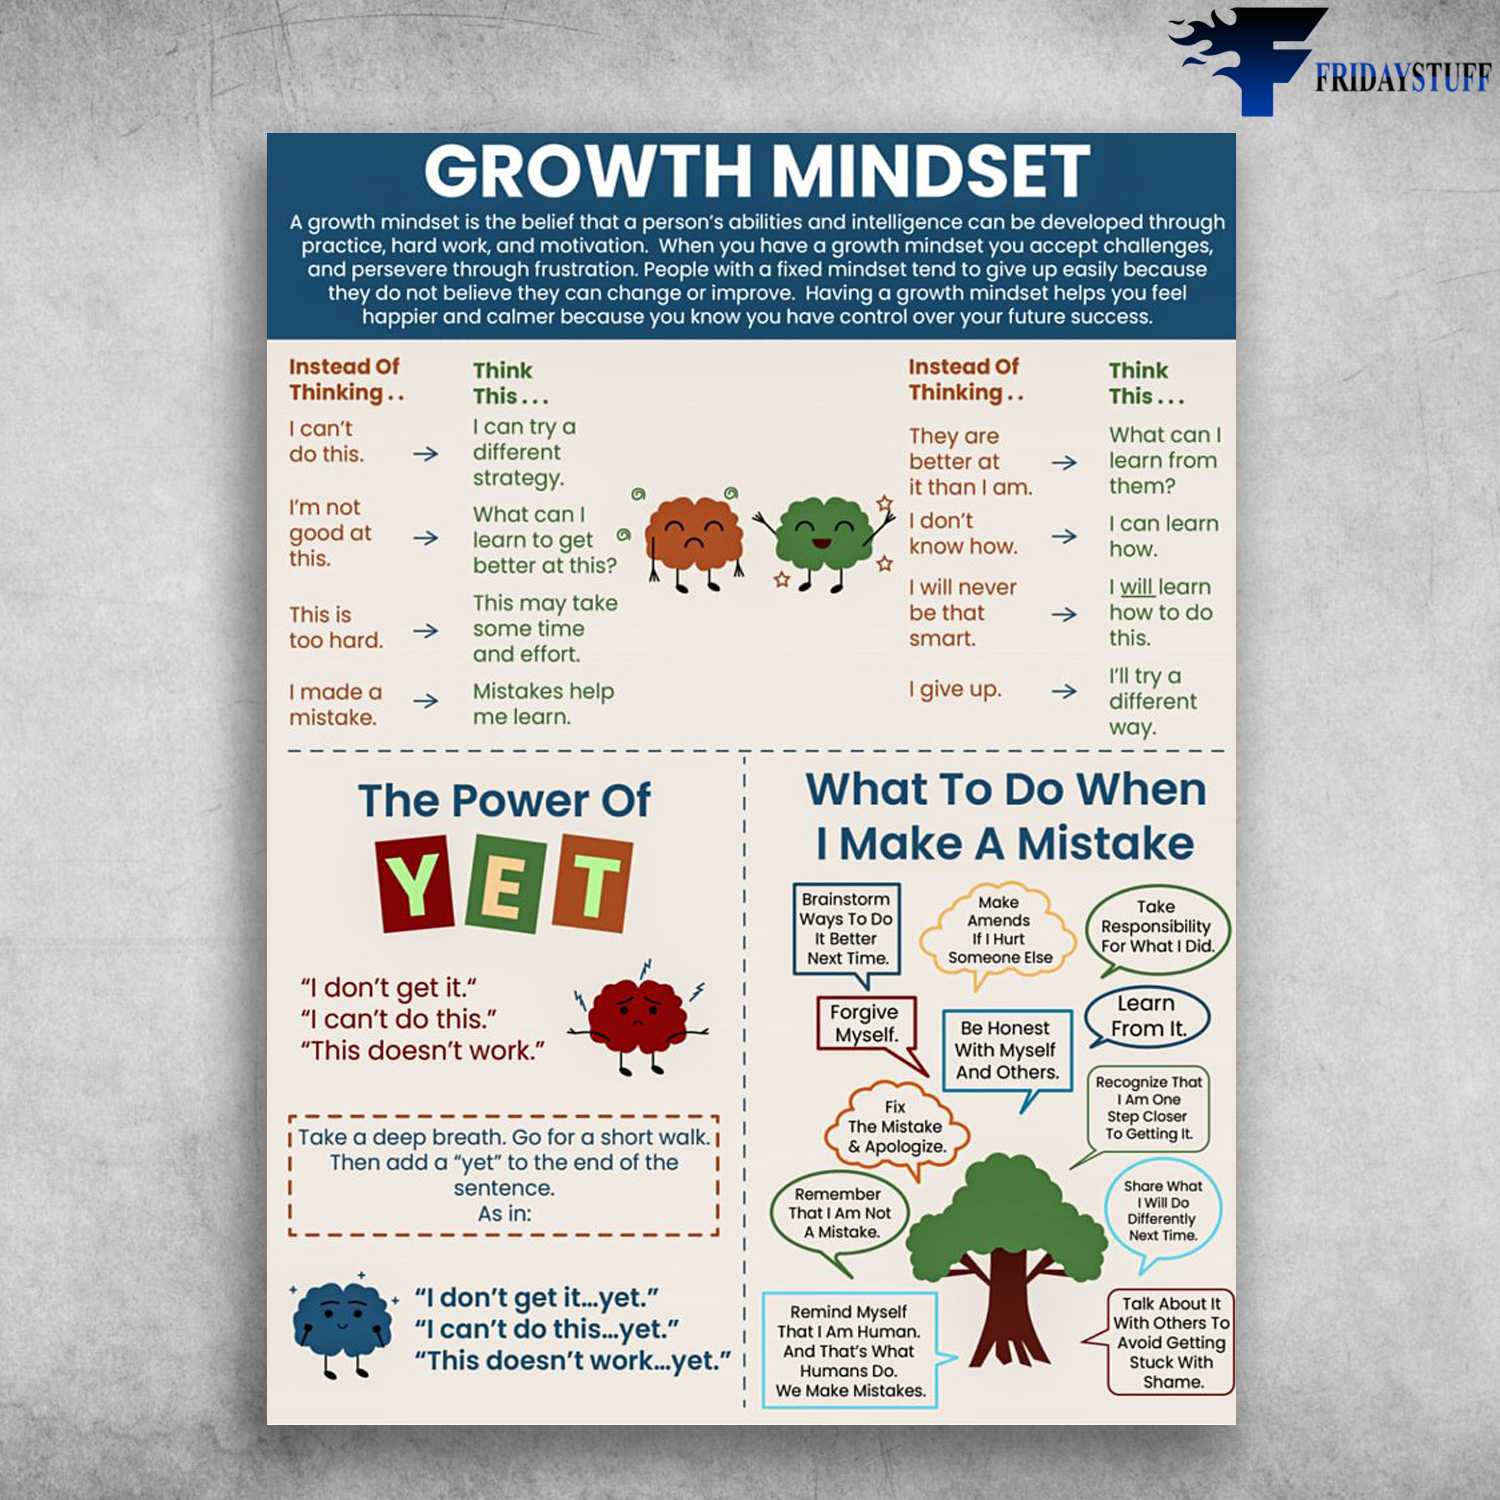 Growth Mindset, The Power Of Yet, What To Do When I Make A Mistake, Mindset Knowledge